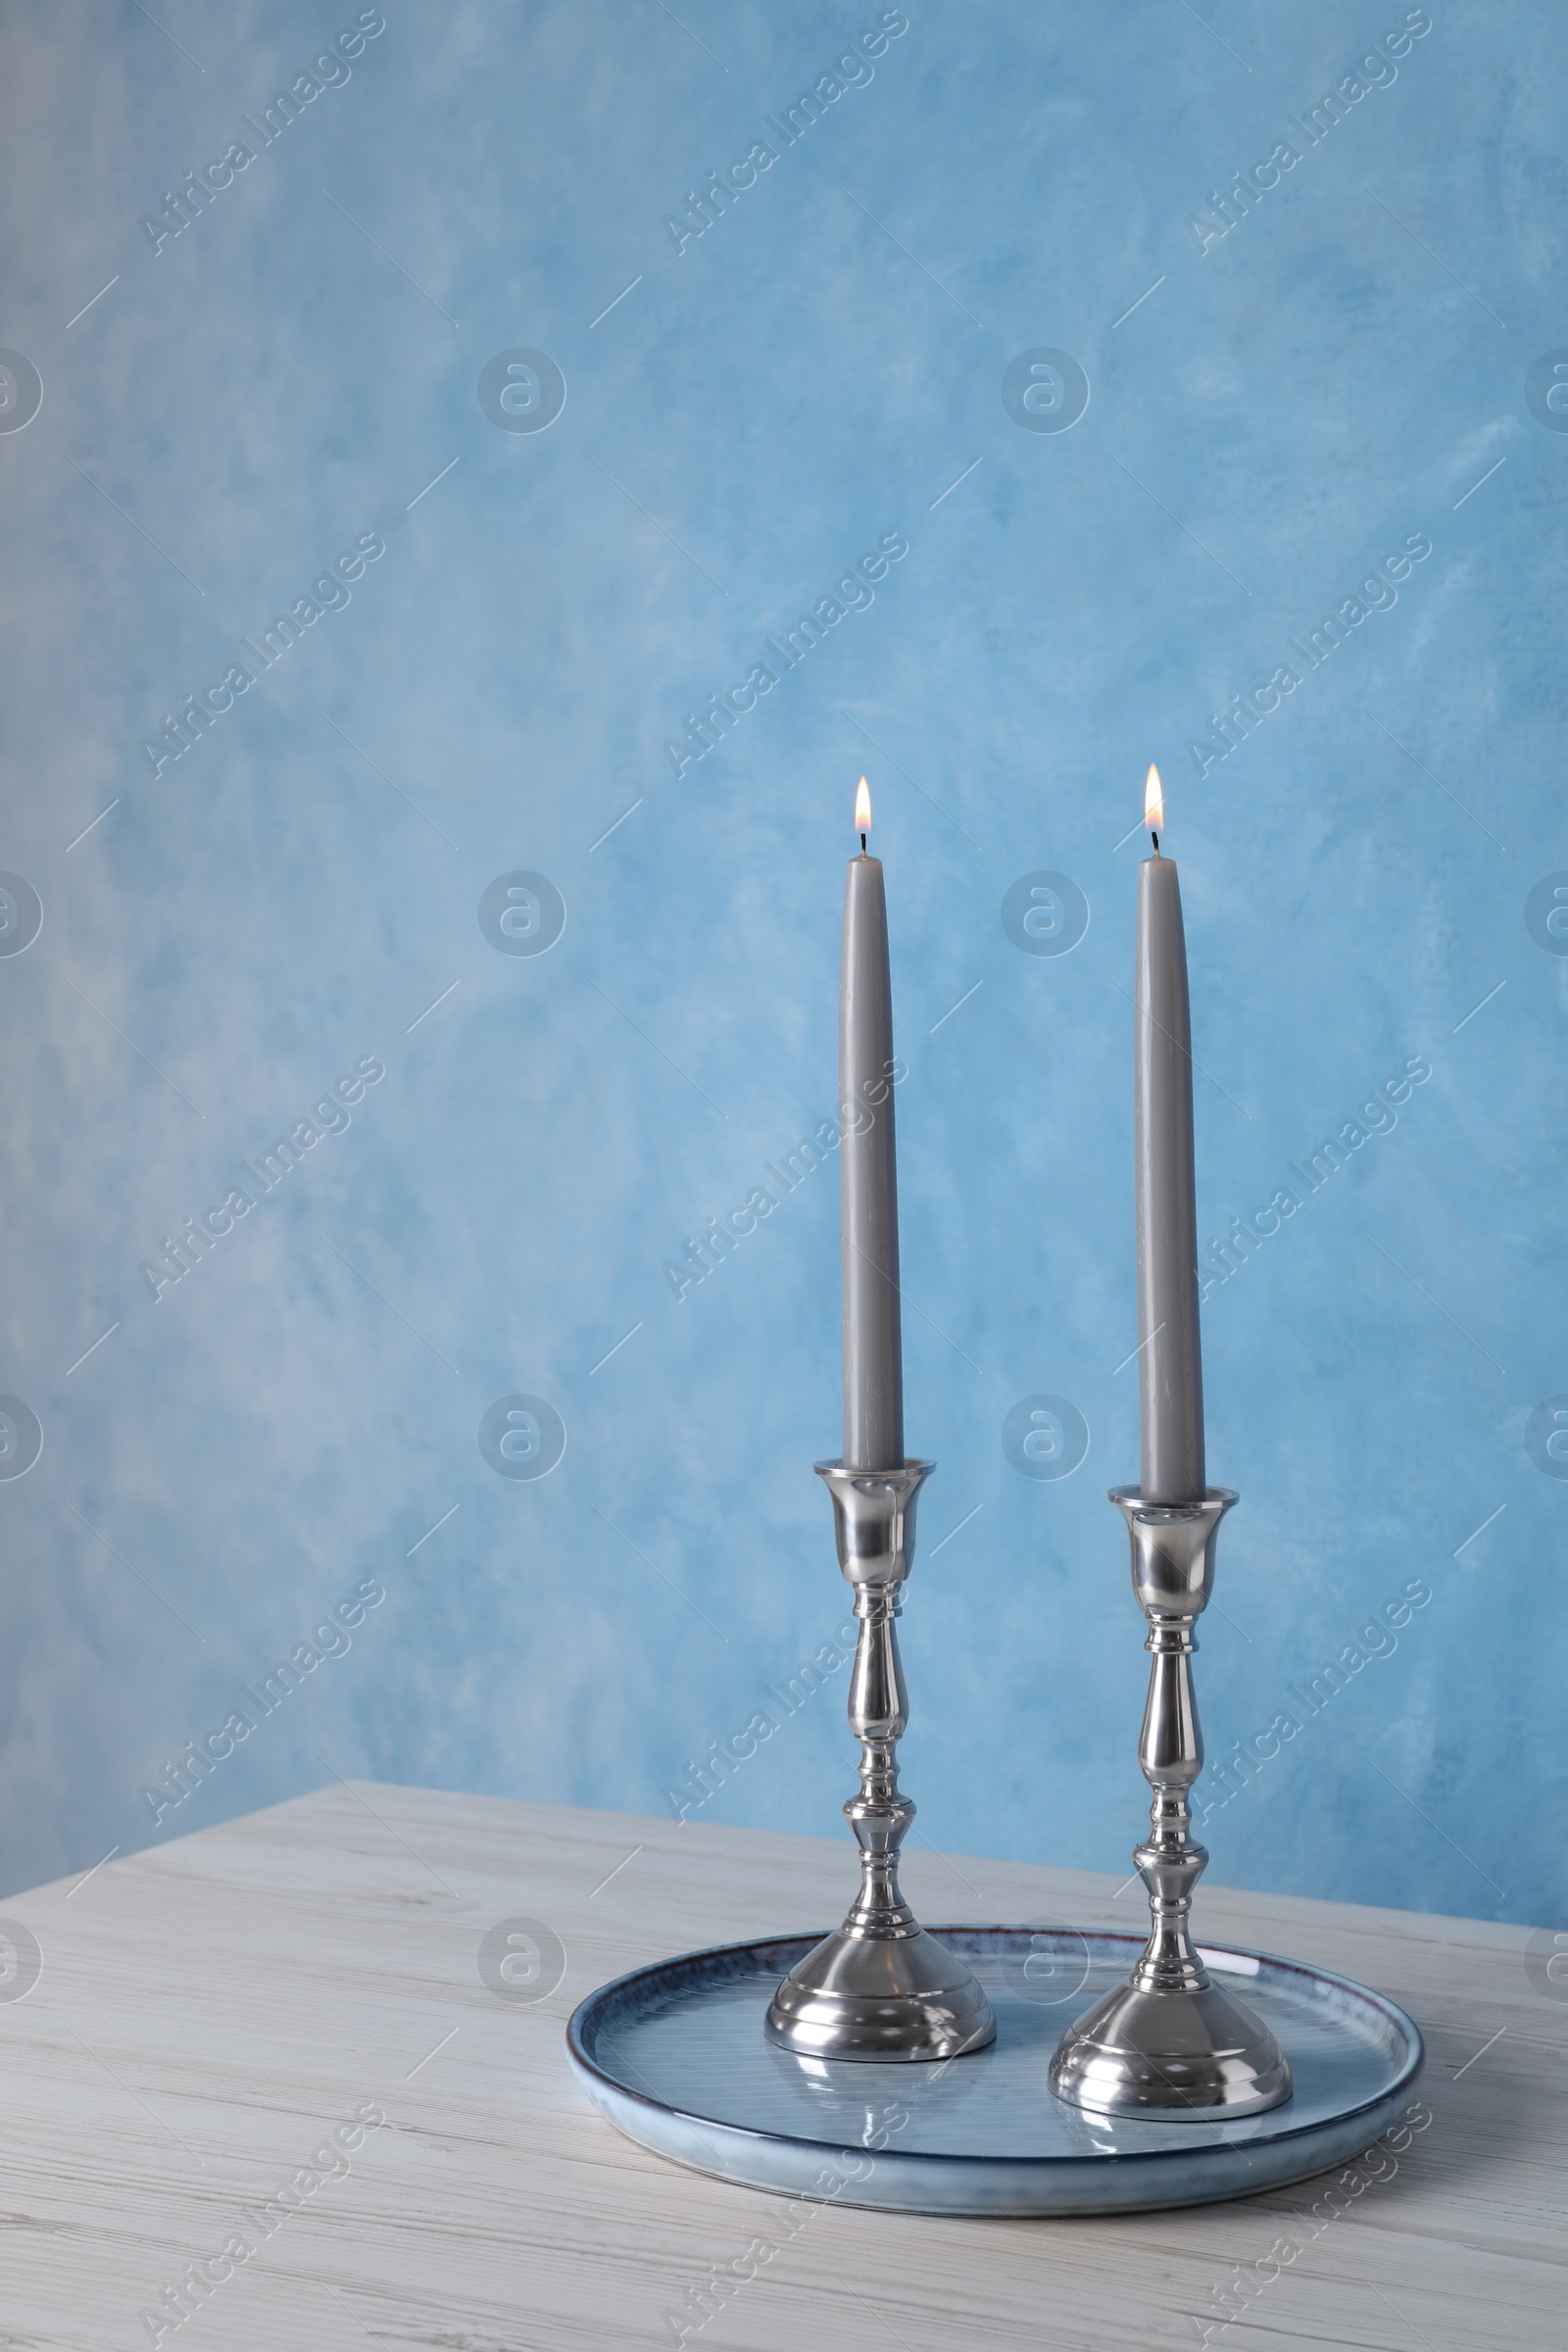 Photo of Holders with burning candles on wooden table near light blue wall, space for text